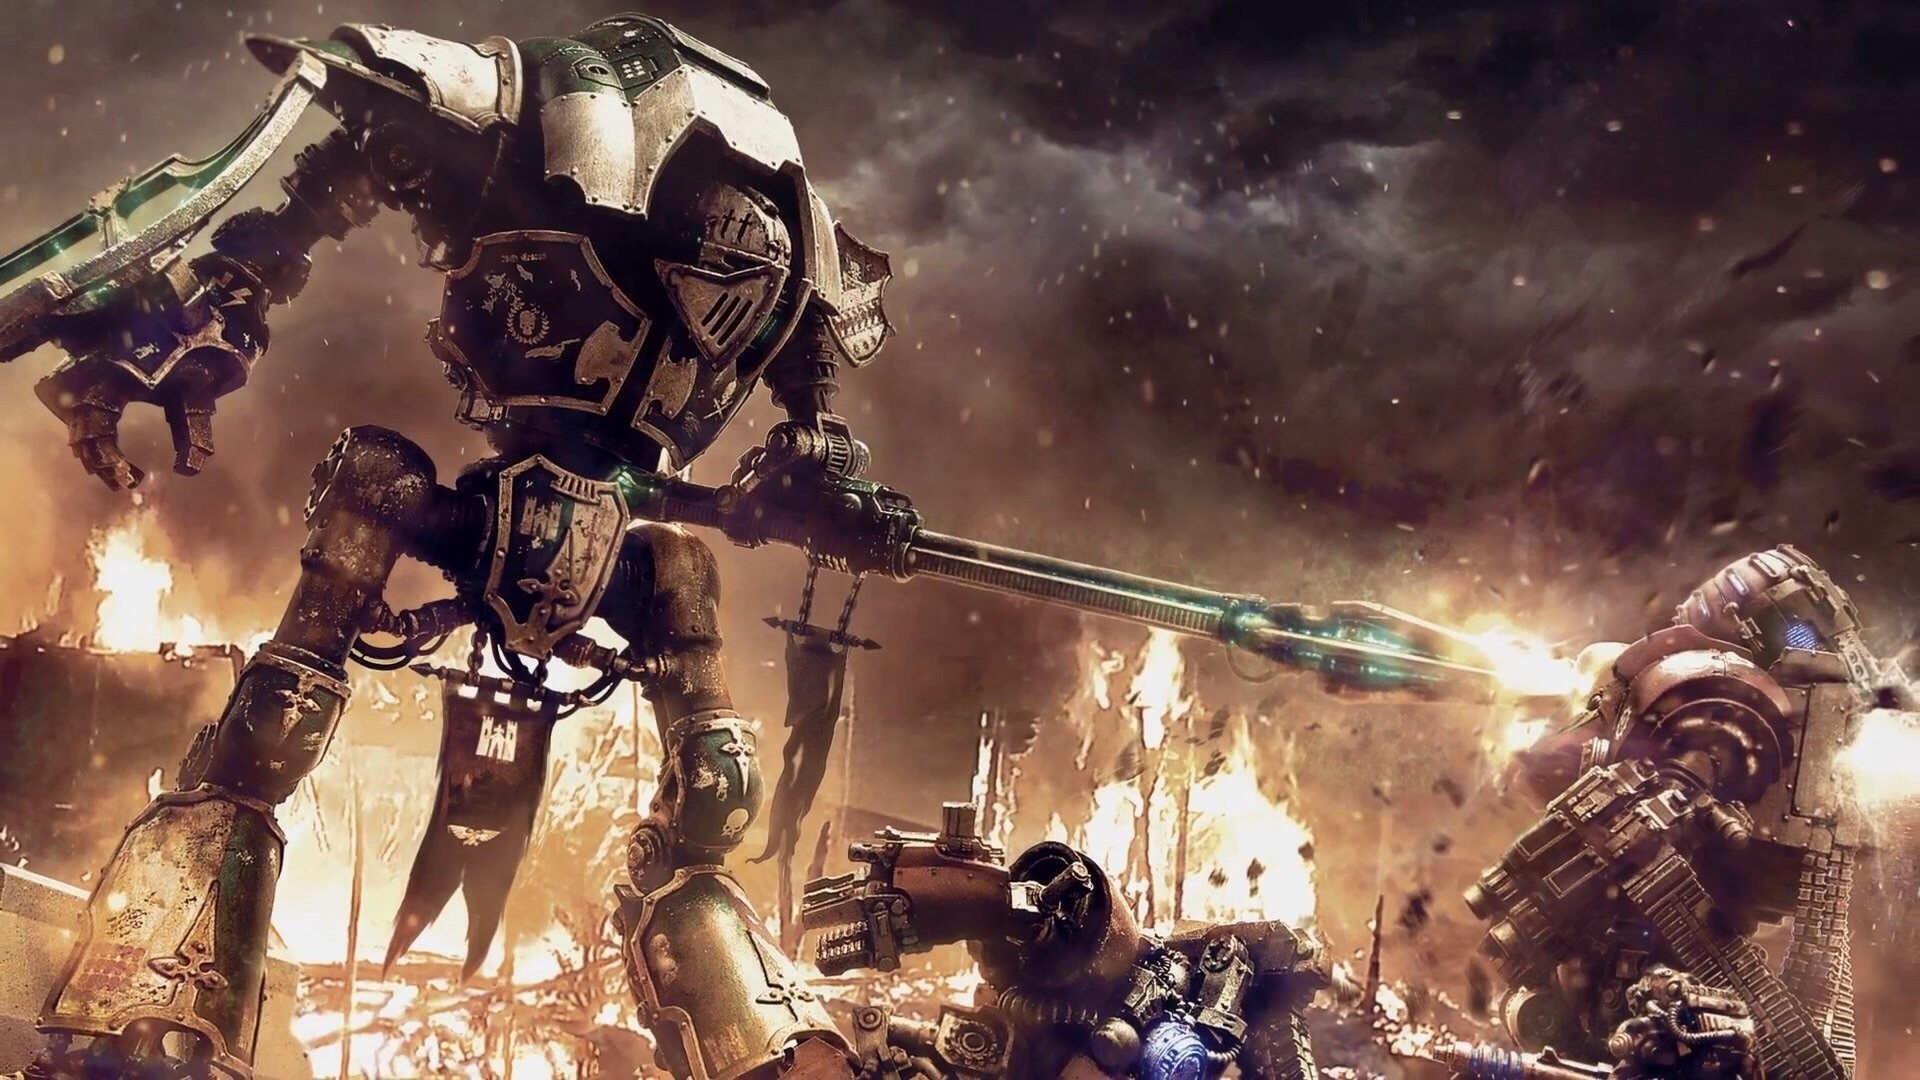 1920x1080 Top Comment. Warhammer 40k Wallpapers.